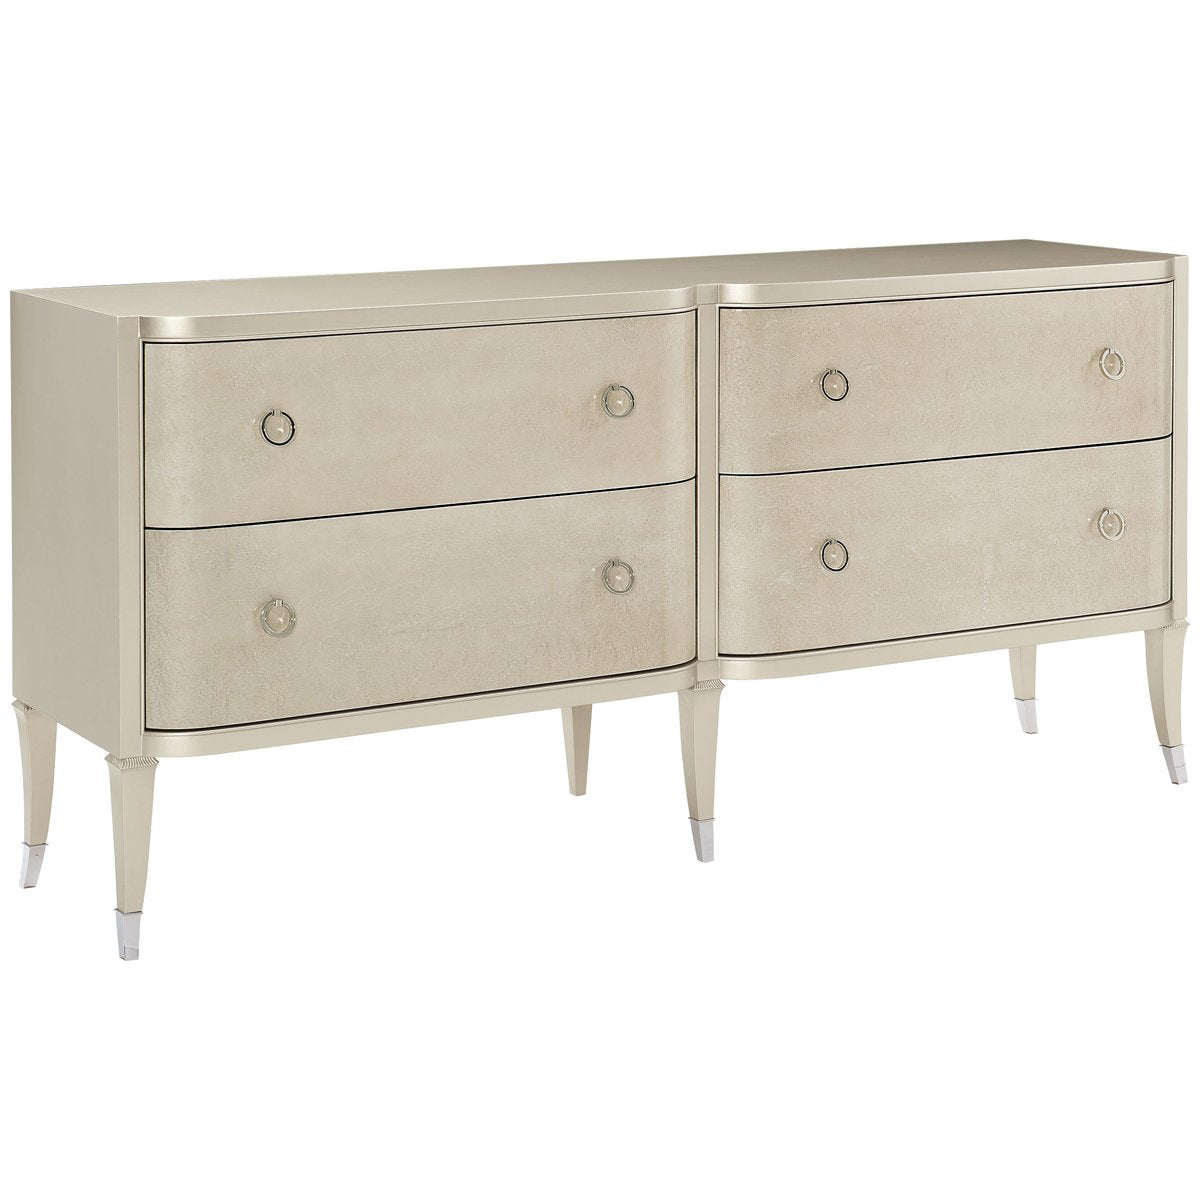 Caracole Classic His or Hers Dresser